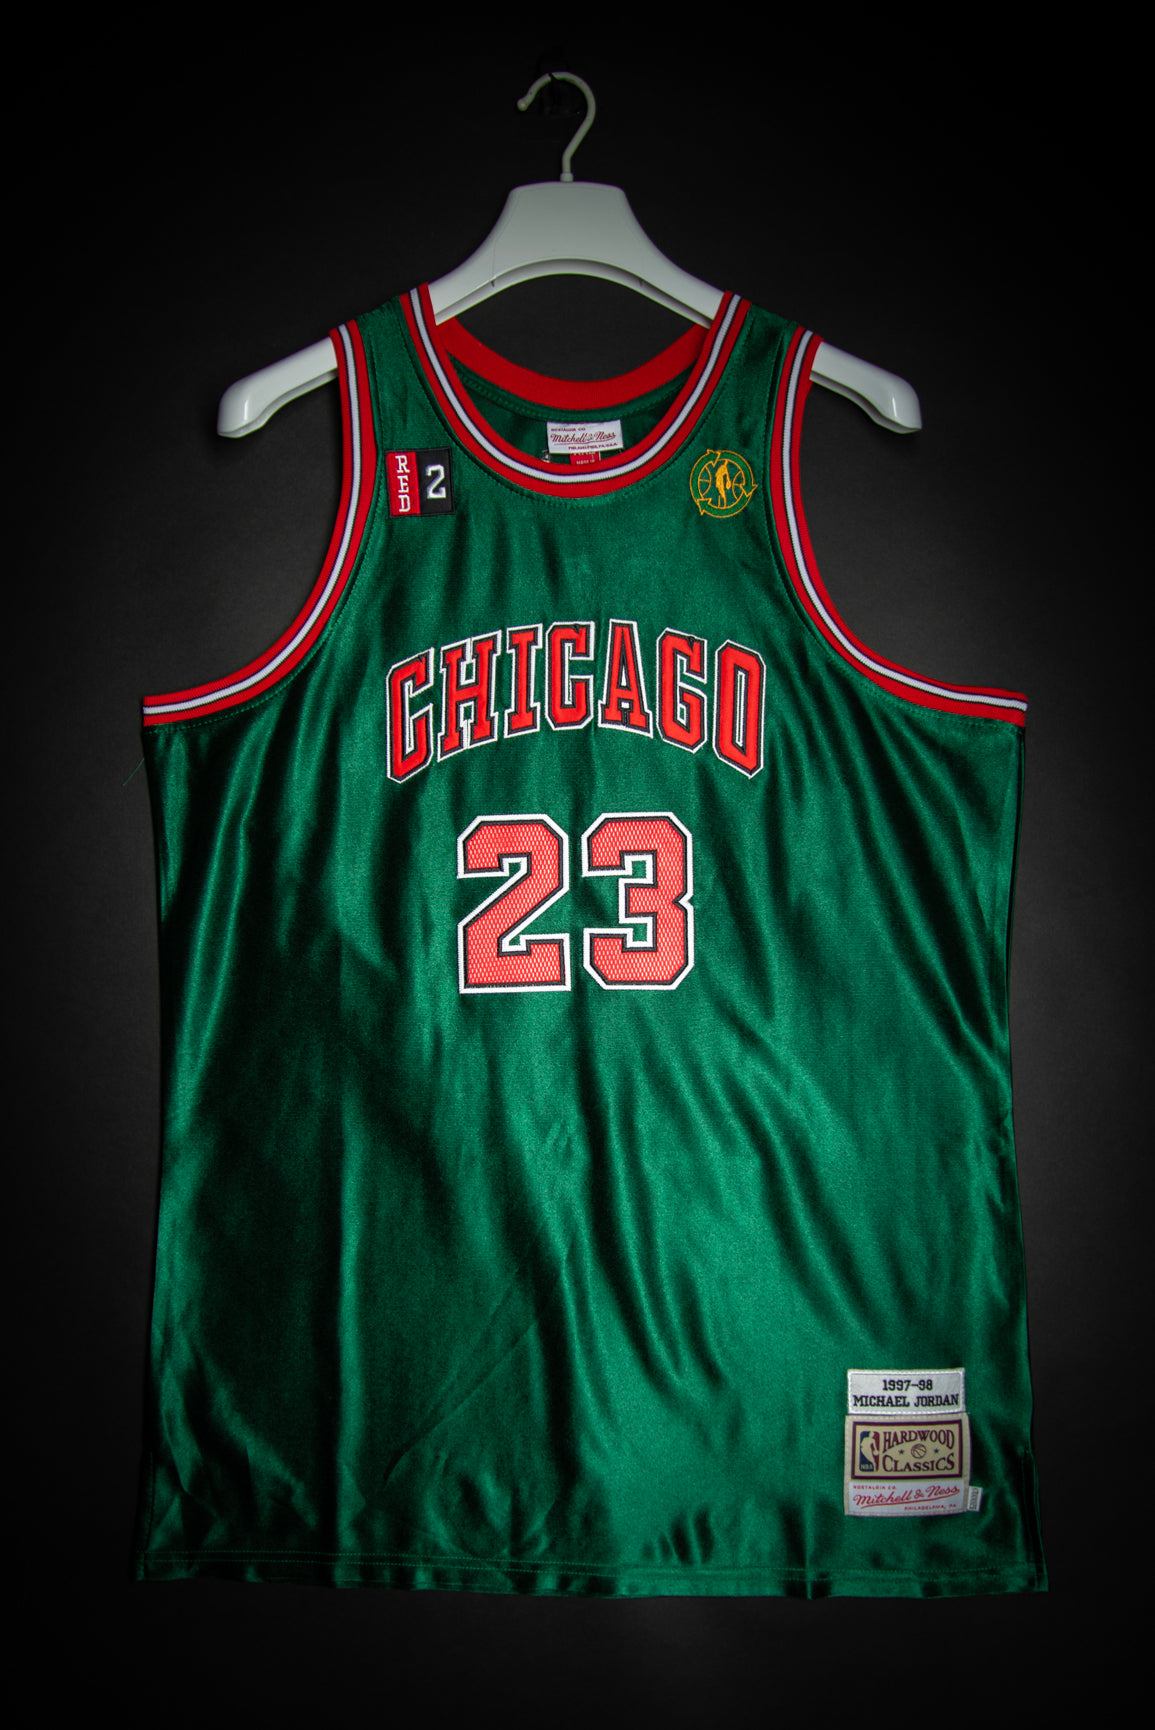 Does anyone know where I can buy this jersey? (hardwood classic